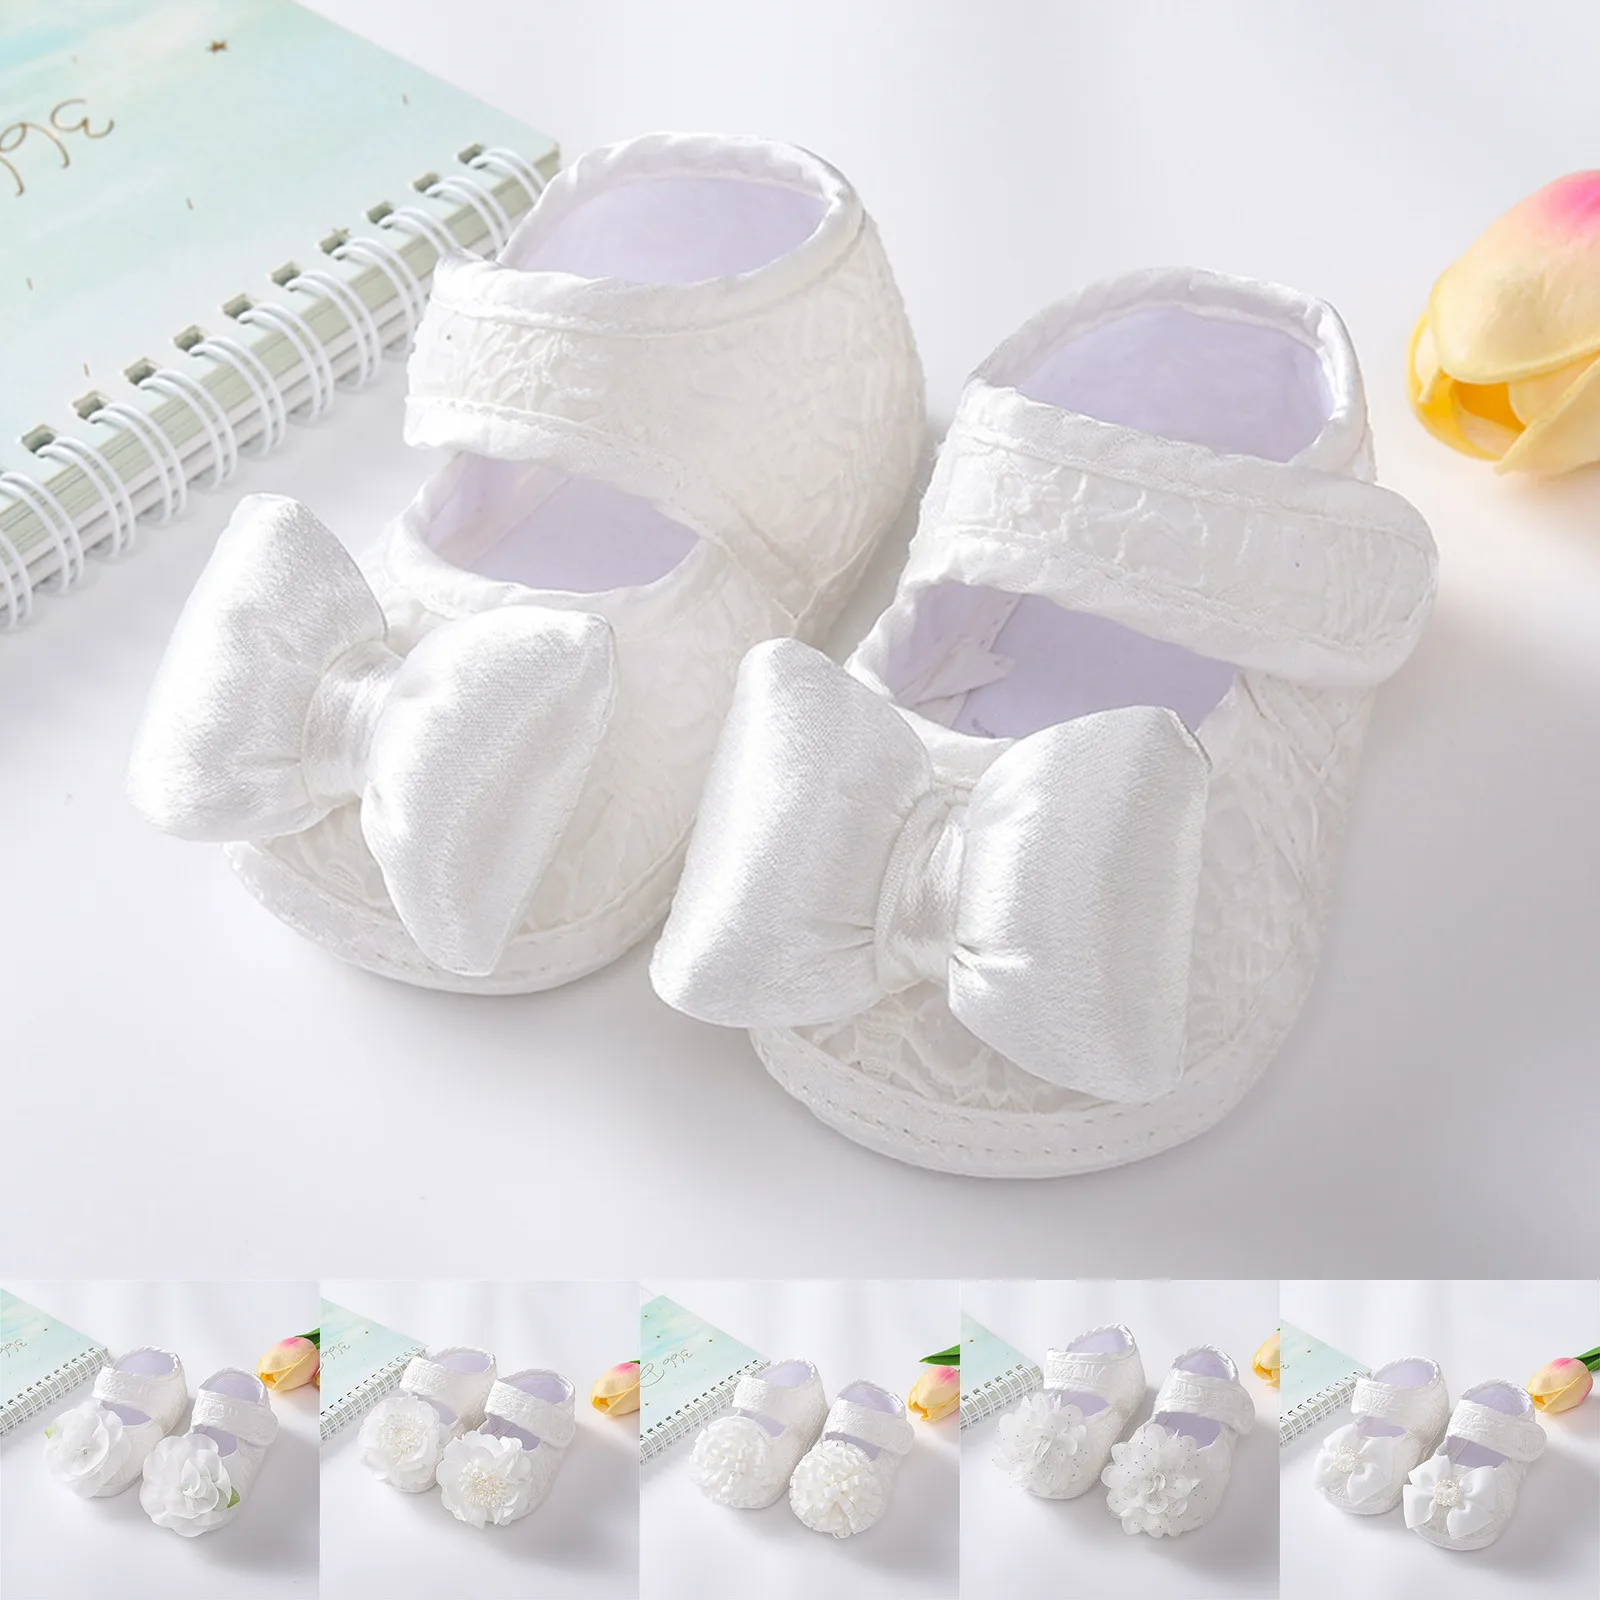 

Infant Newborn Baby Girls Soft Soled Crib Toddler Shoes Bowknot Walking Shoes Toddler Zapatos Baby Girls Leisure Shoes Sneakers